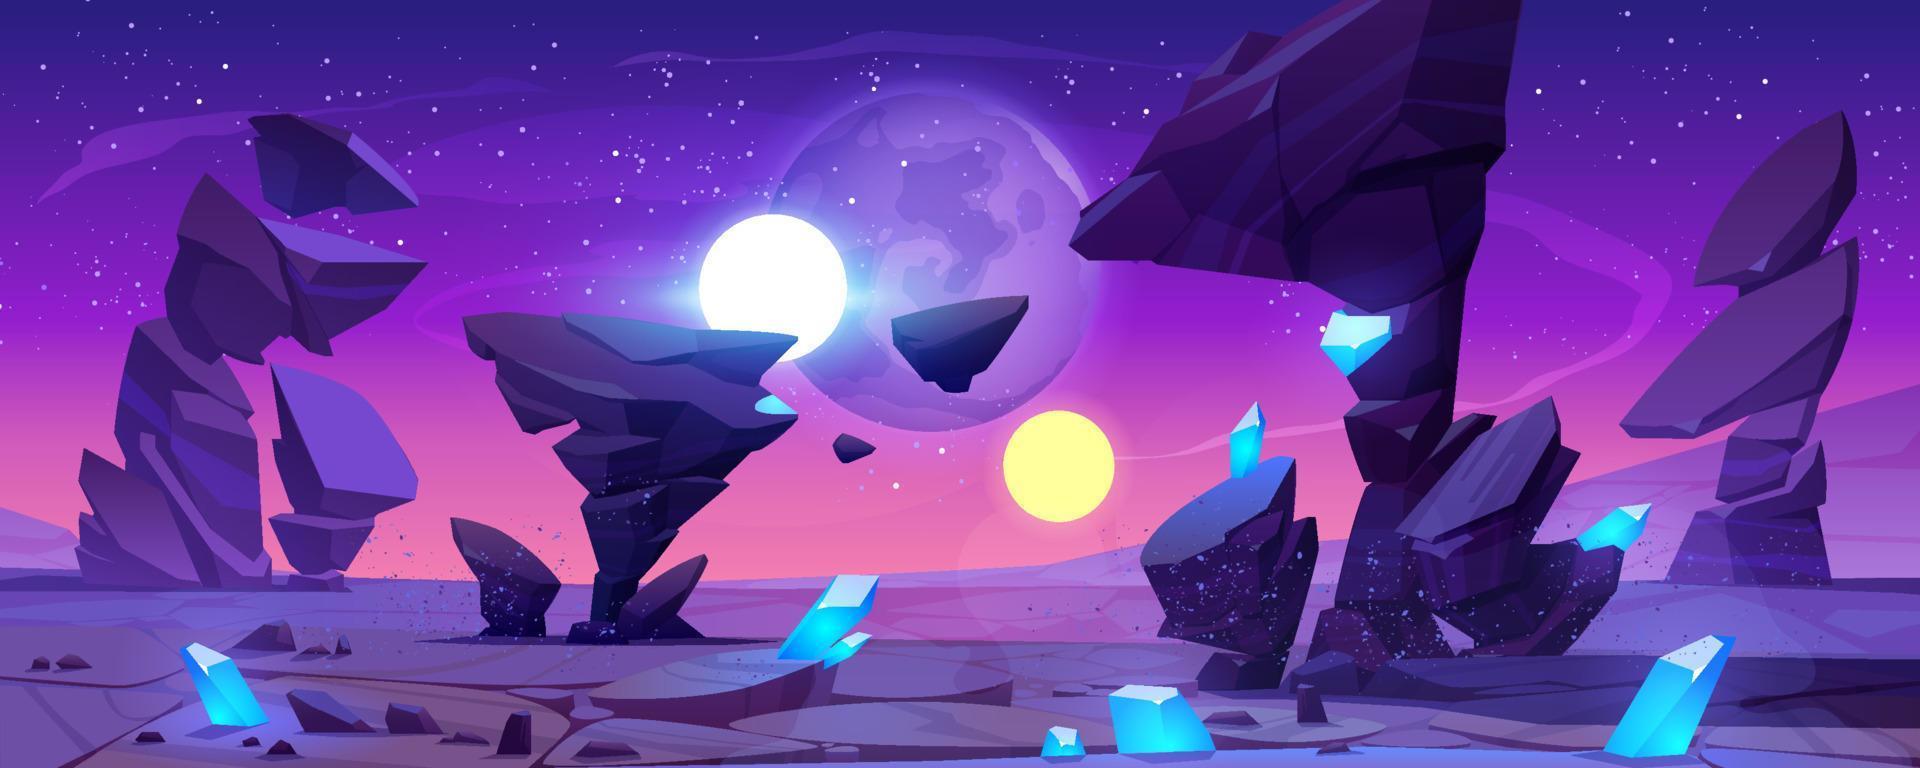 Alien planet landscape at night for space game vector